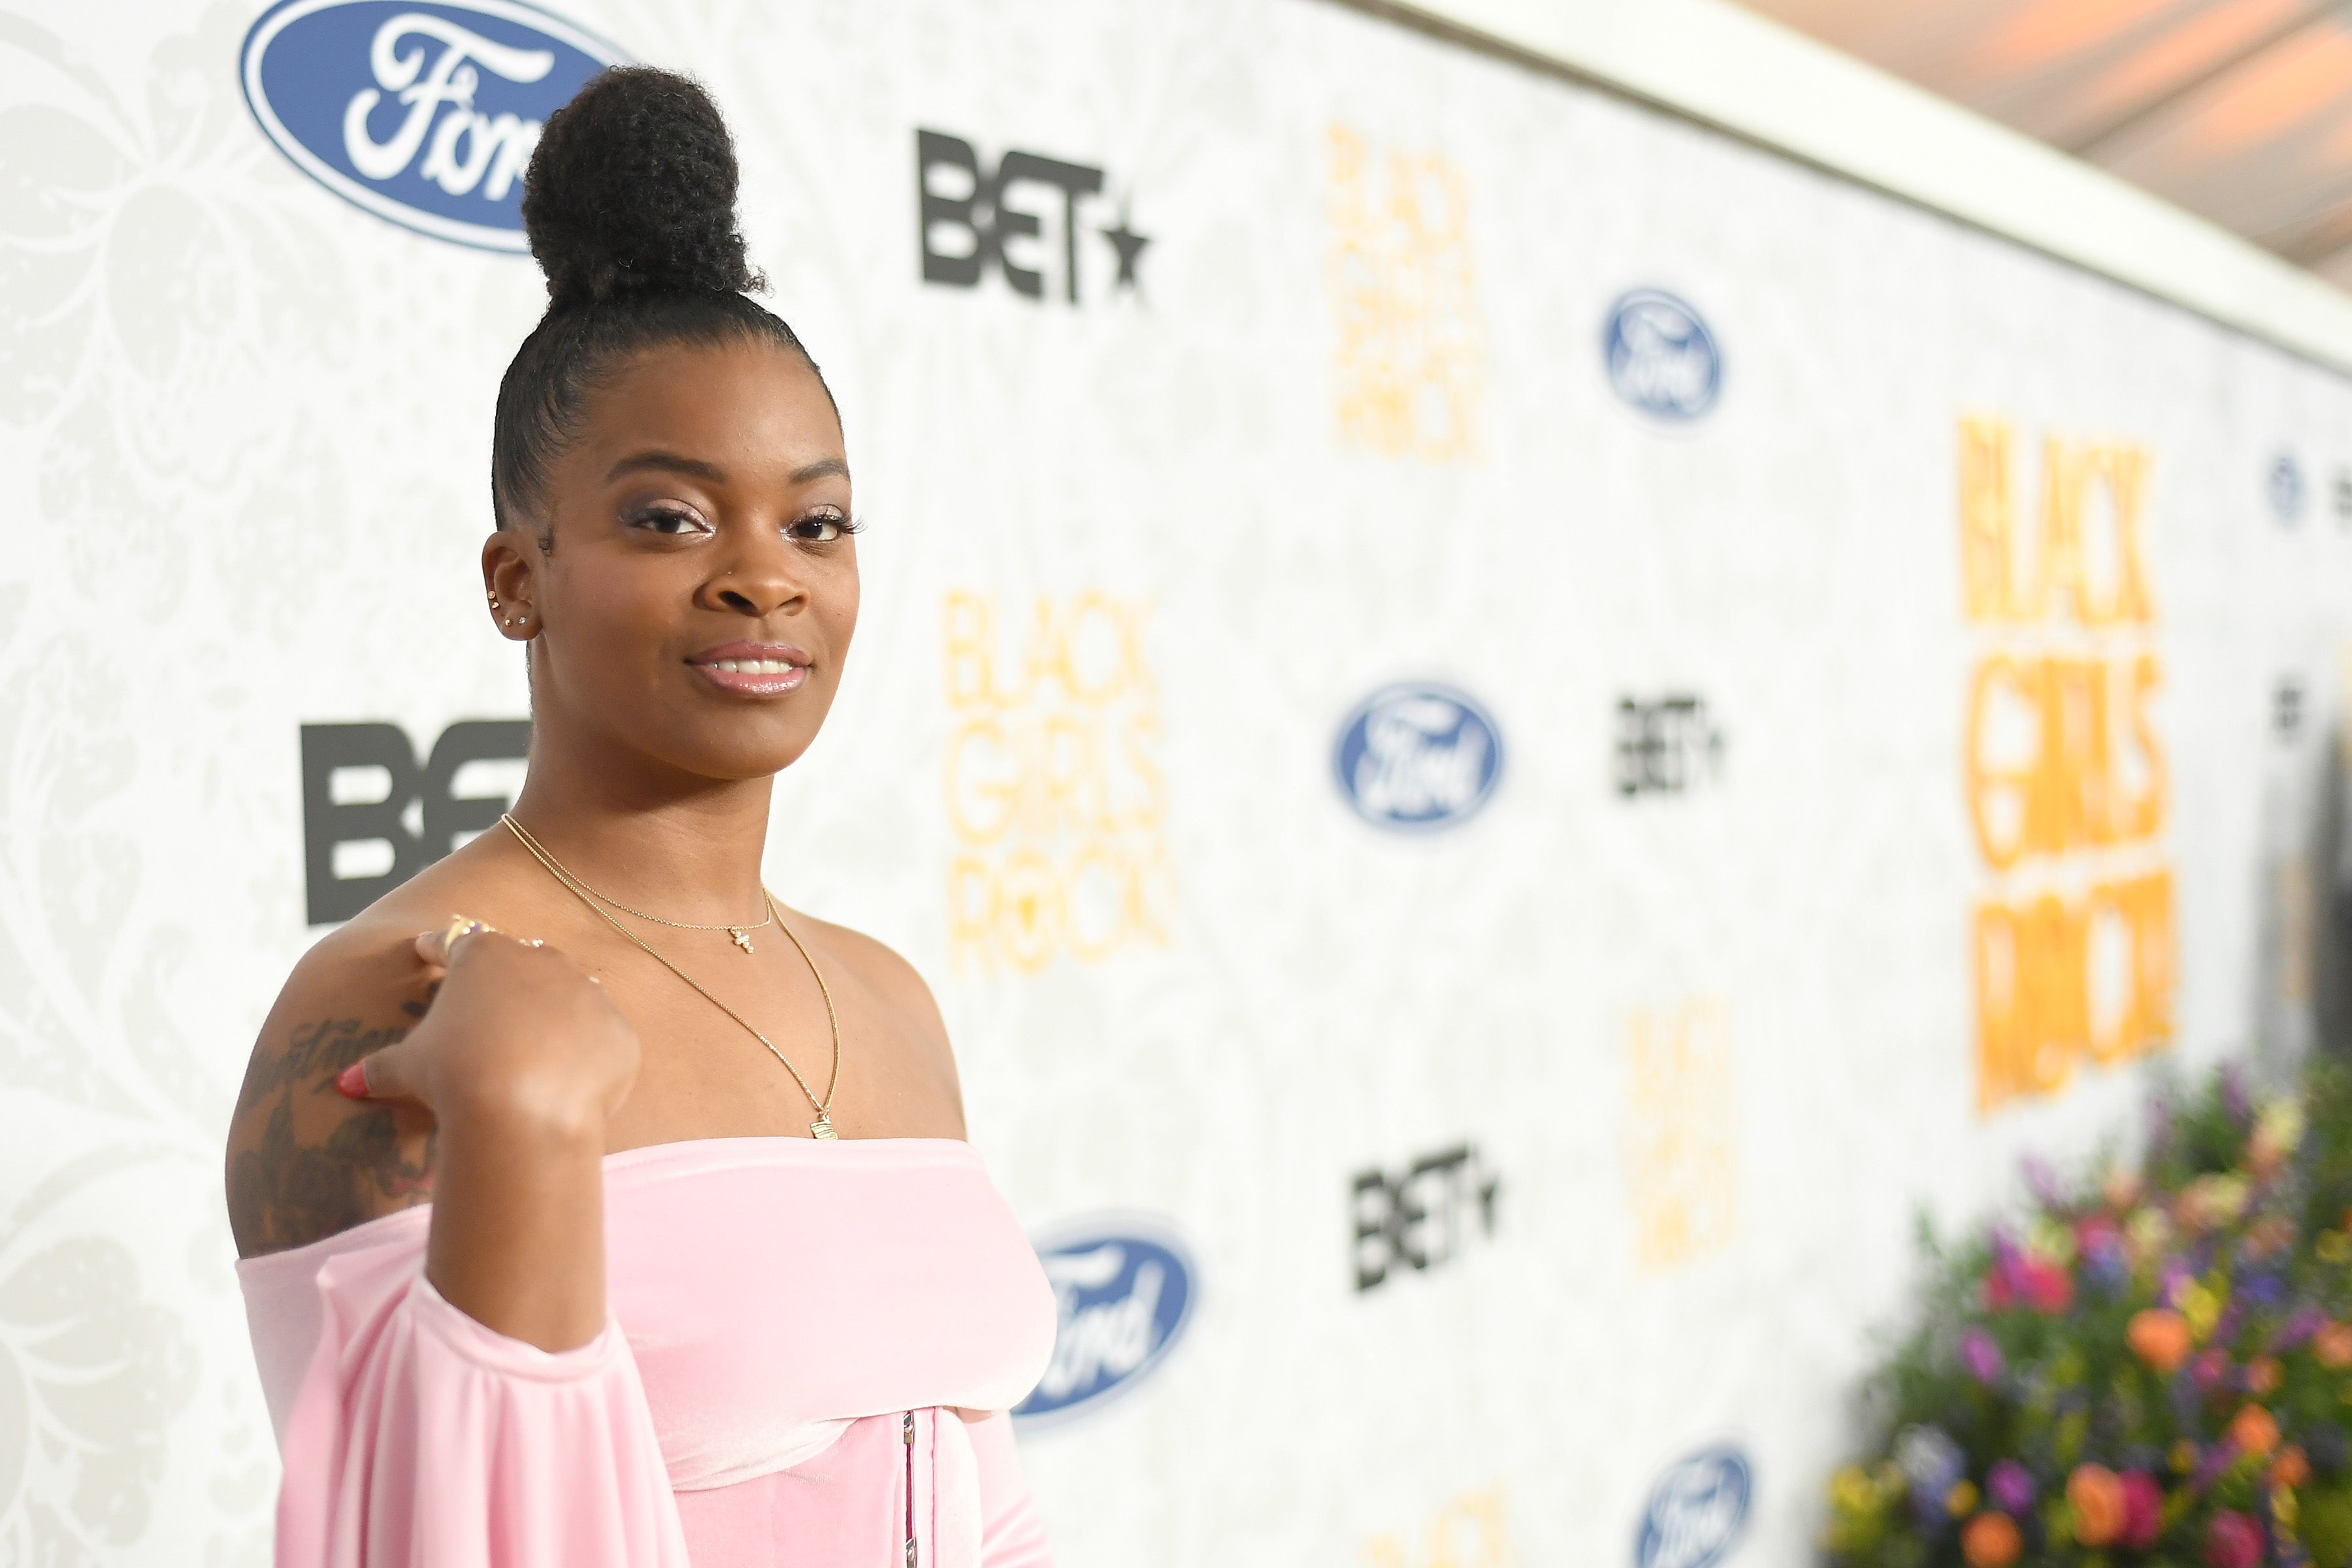 Ari Lennox Calls Out Troll Who Compared Her To Rottweilers: ‘Why Are You So Comfortable Tearing Down Black Women?’